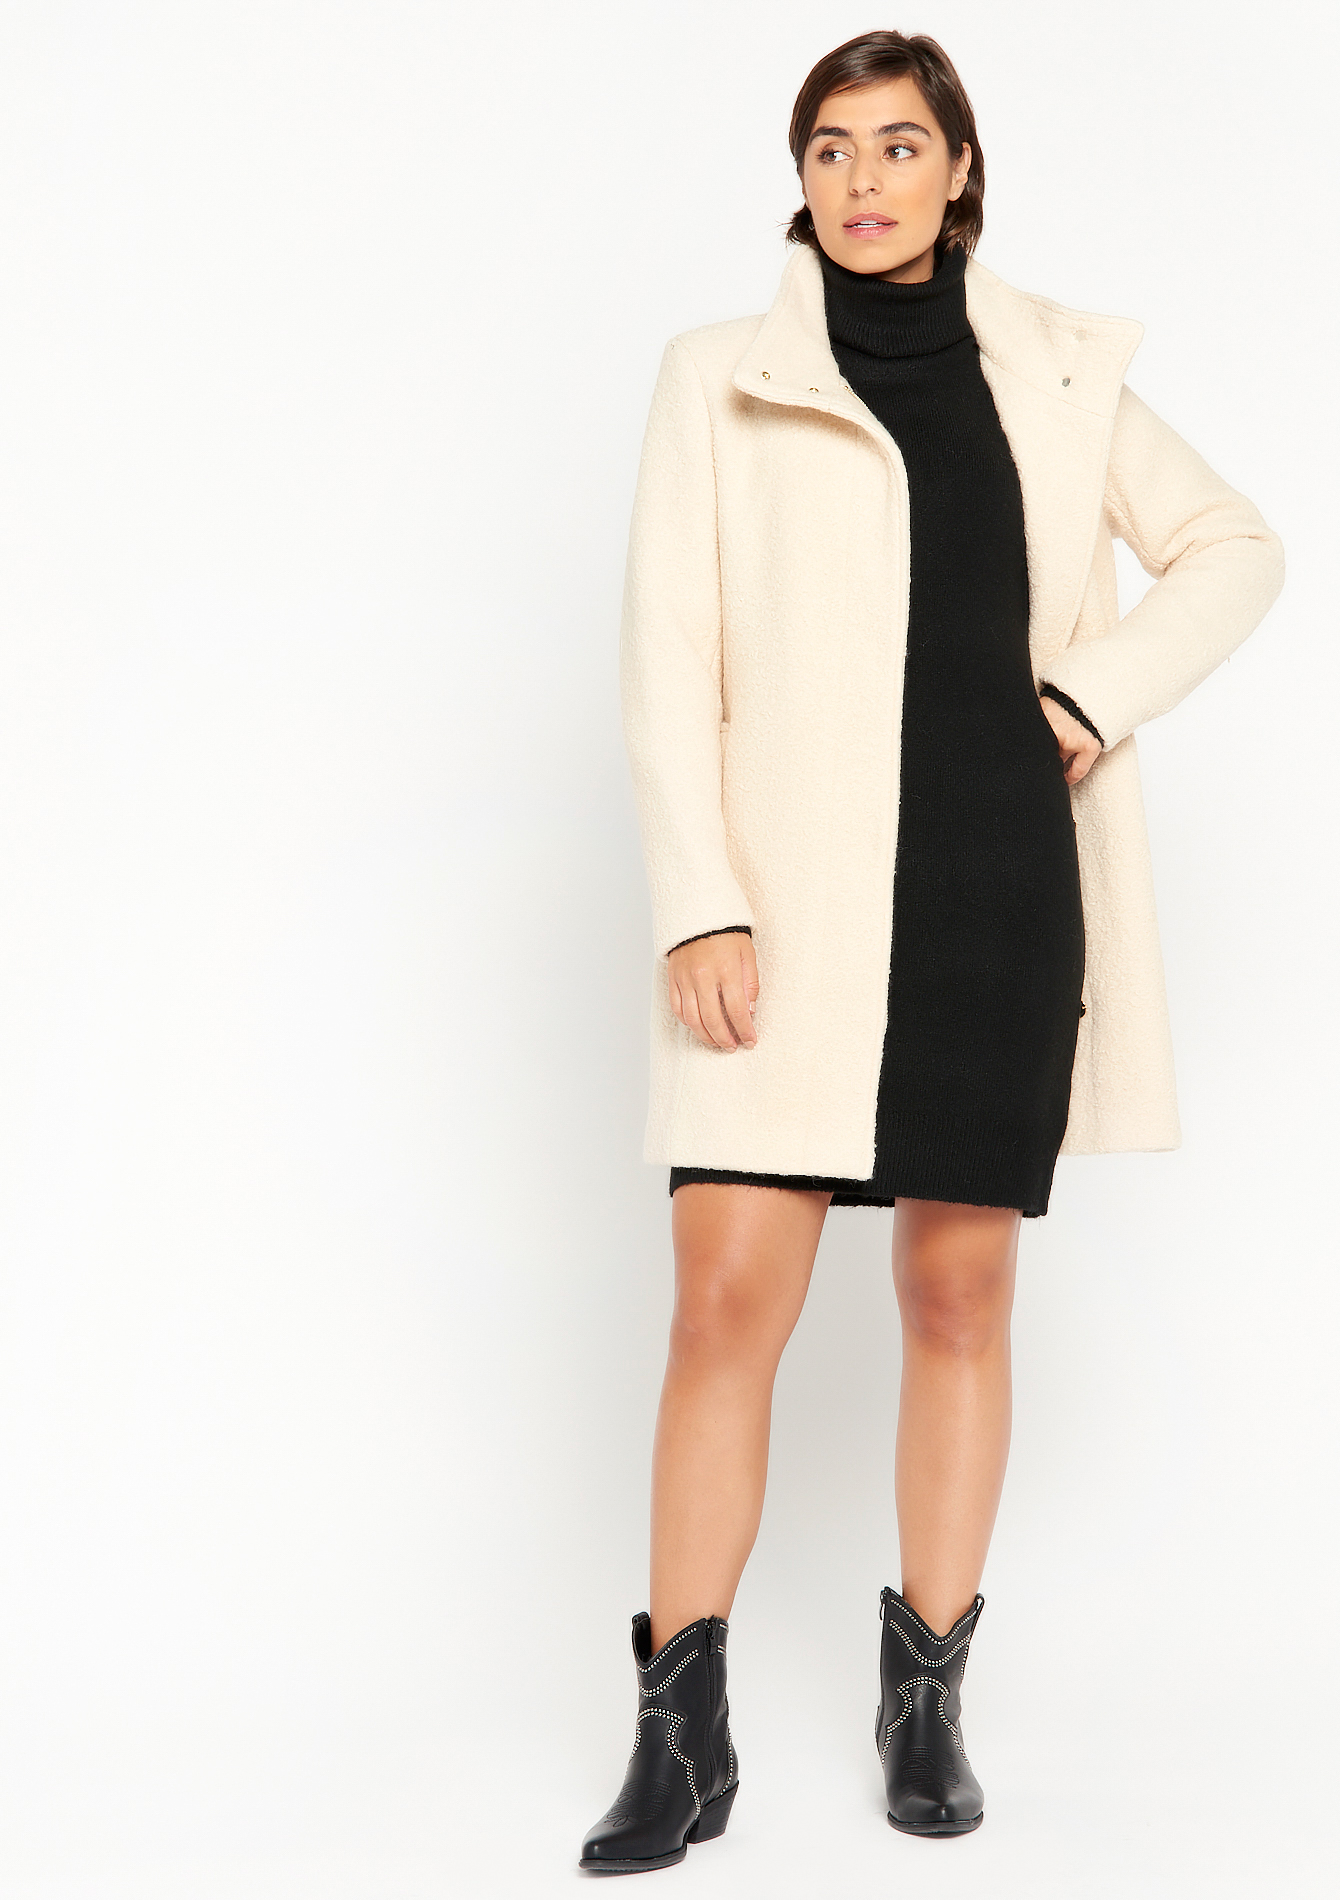 Long wollen coat with high-neck - OFFWHITE - 23000391_1001